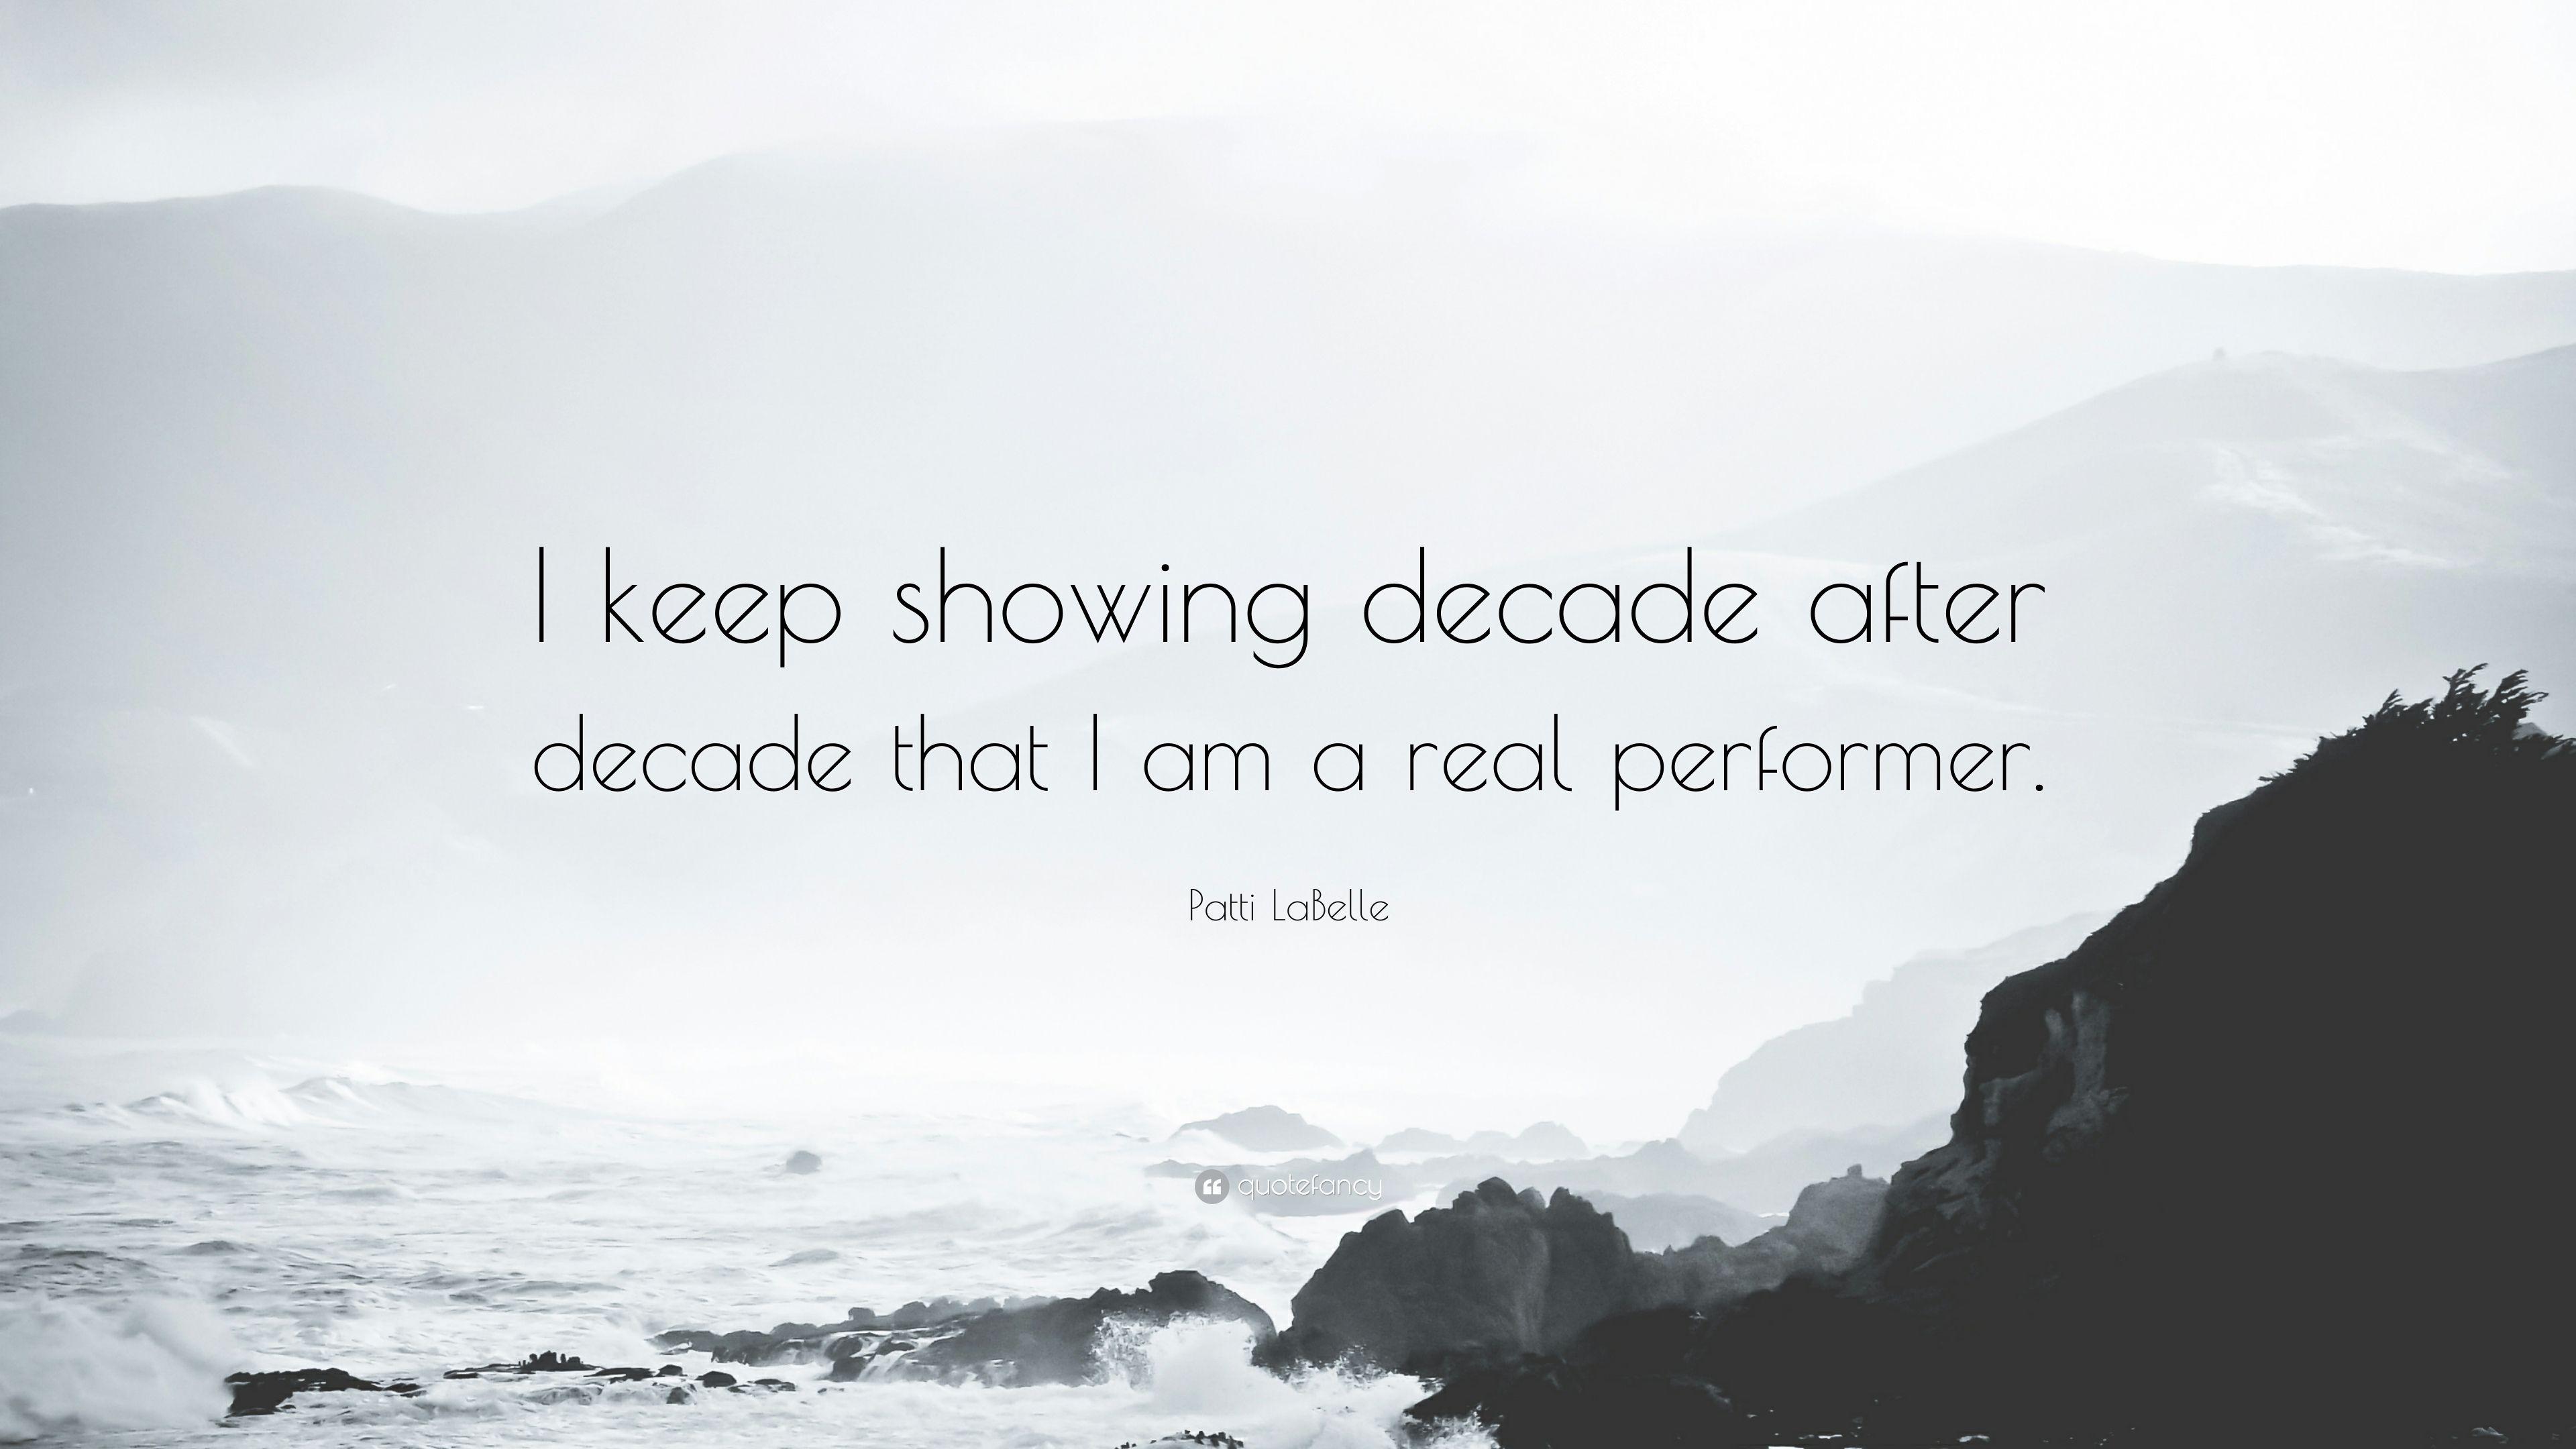 Patti LaBelle Quote: “I keep showing decade after decade that I am a